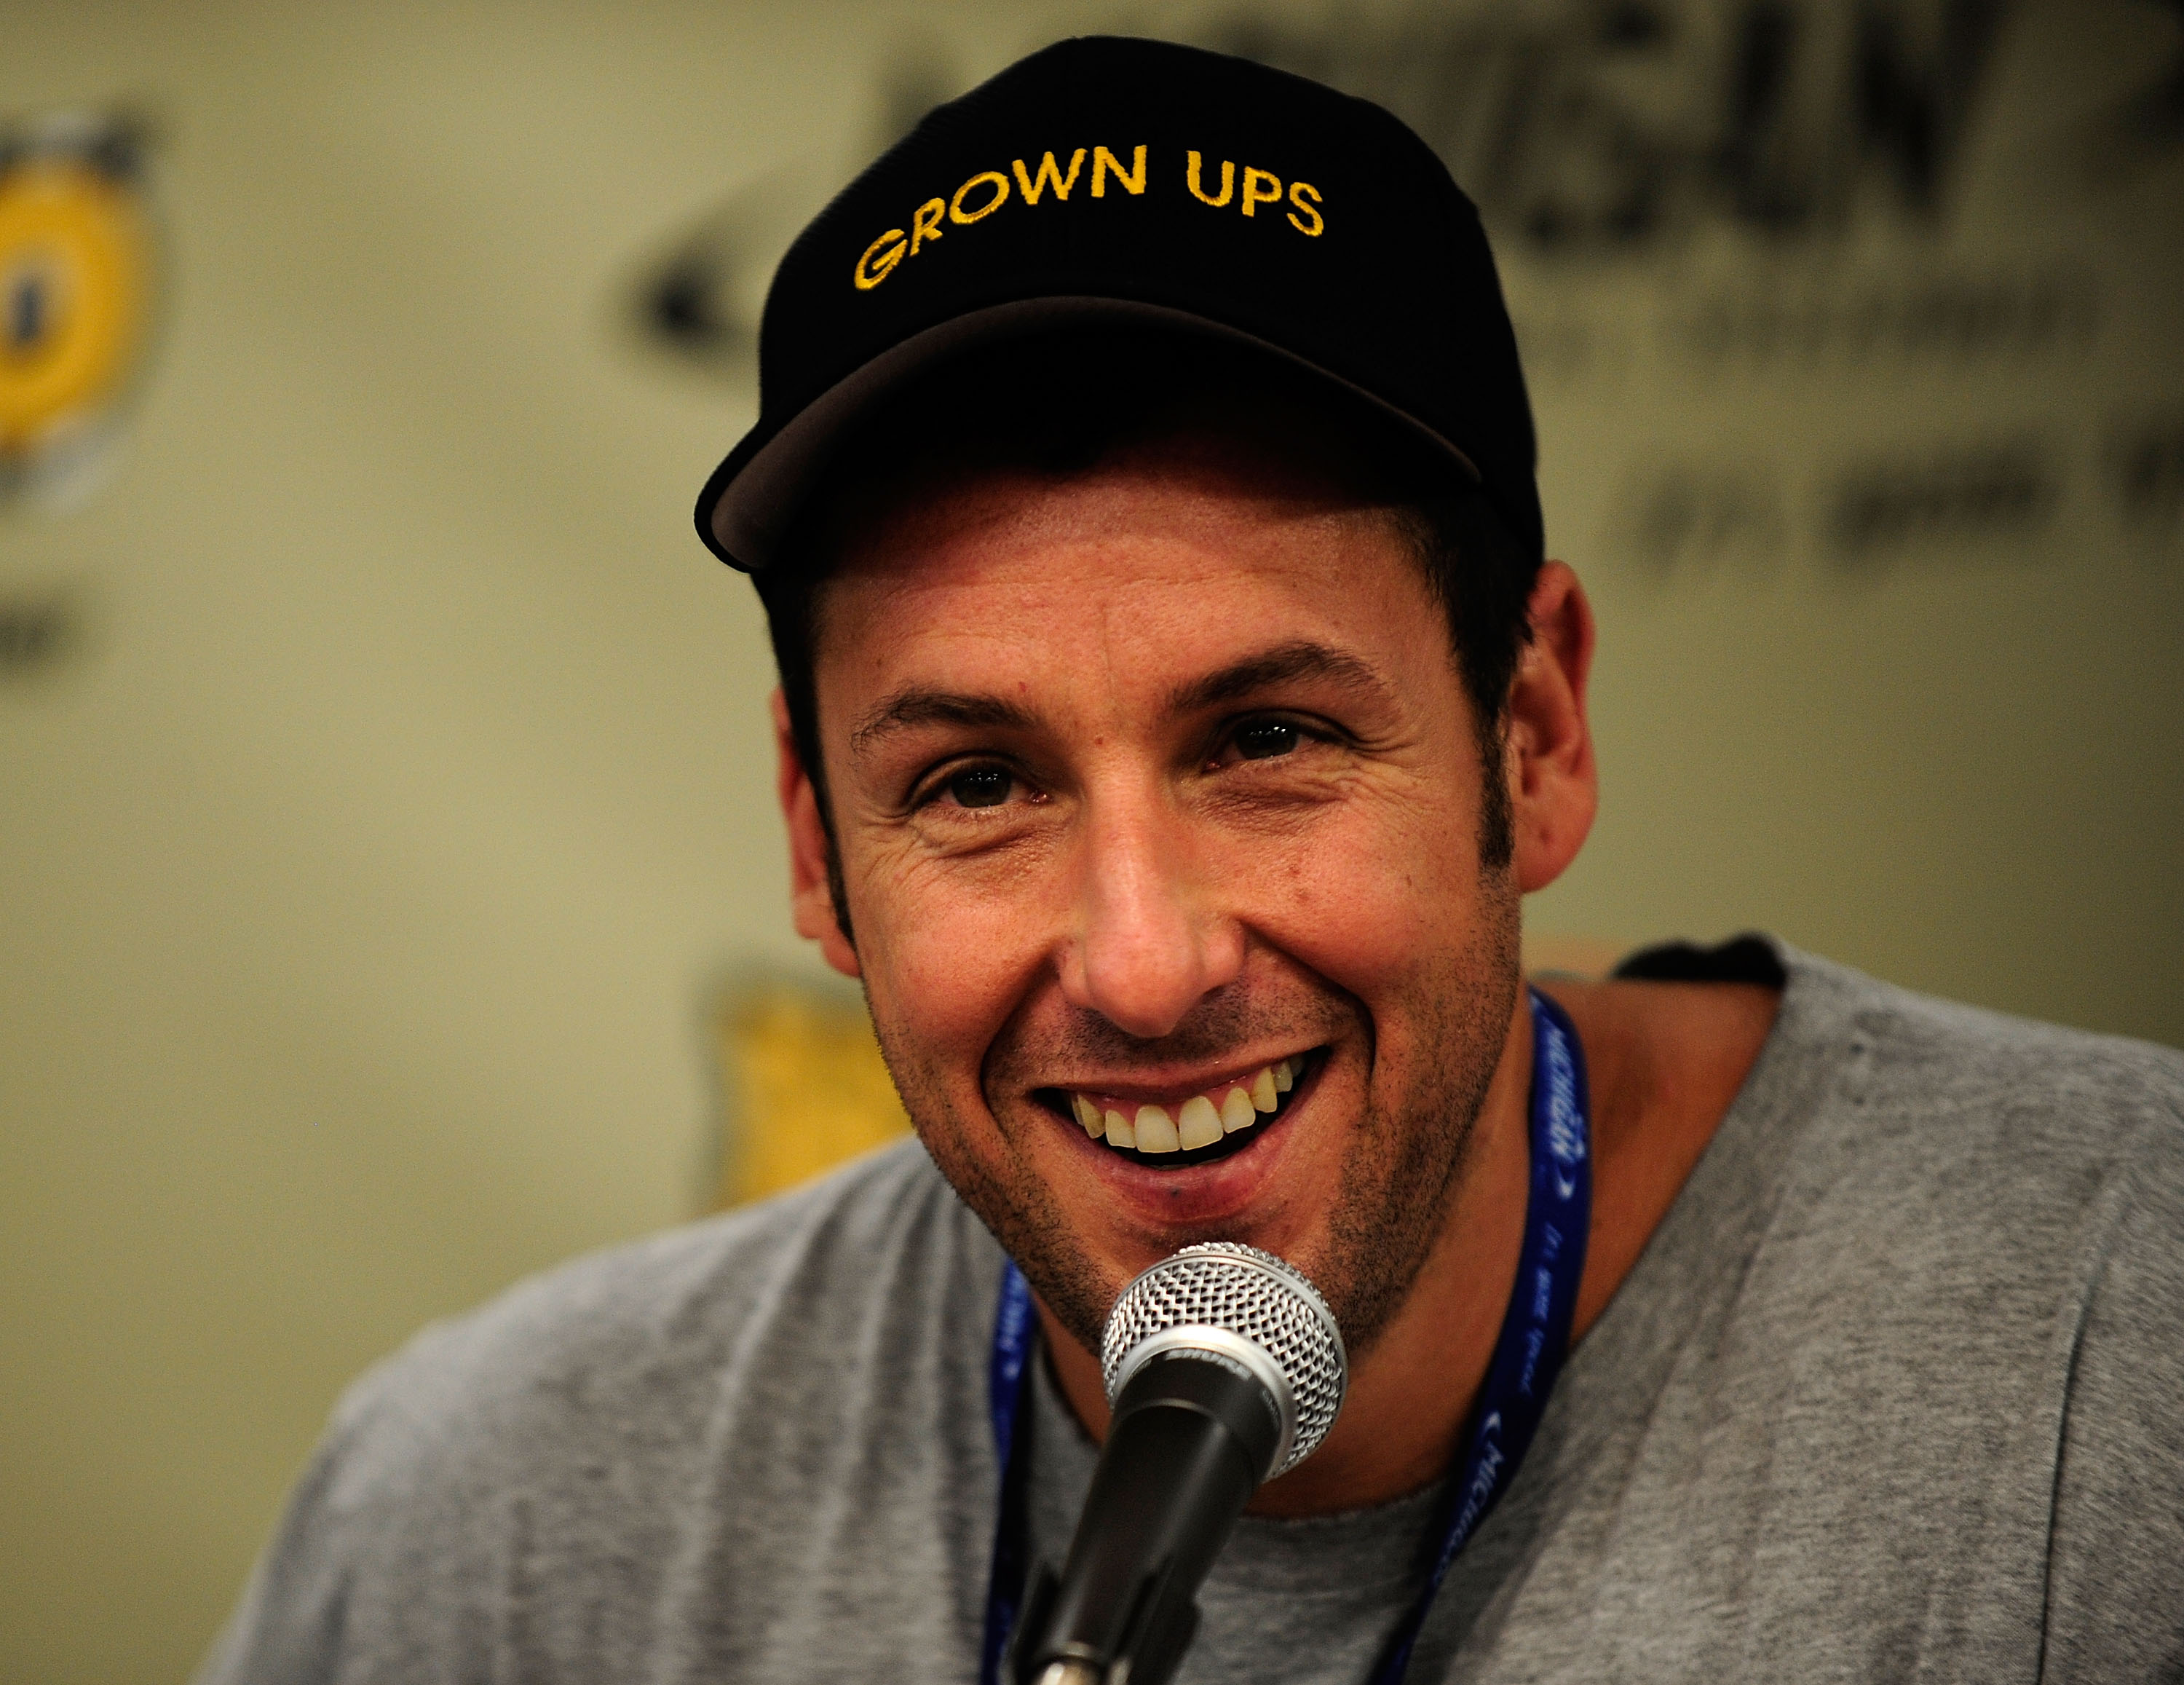 BROOKLYN, MI - JUNE 13:  (L-R) Actor Adam Sandler speaks to the media prior to the NASCAR Sprint Cup Series Heluva Good! Sour Cream Dips 400 at Michigan International Speedway on June 13, 2010 in Brooklyn, Michigan.  (Photo by Sam Greenwood/Getty Images)